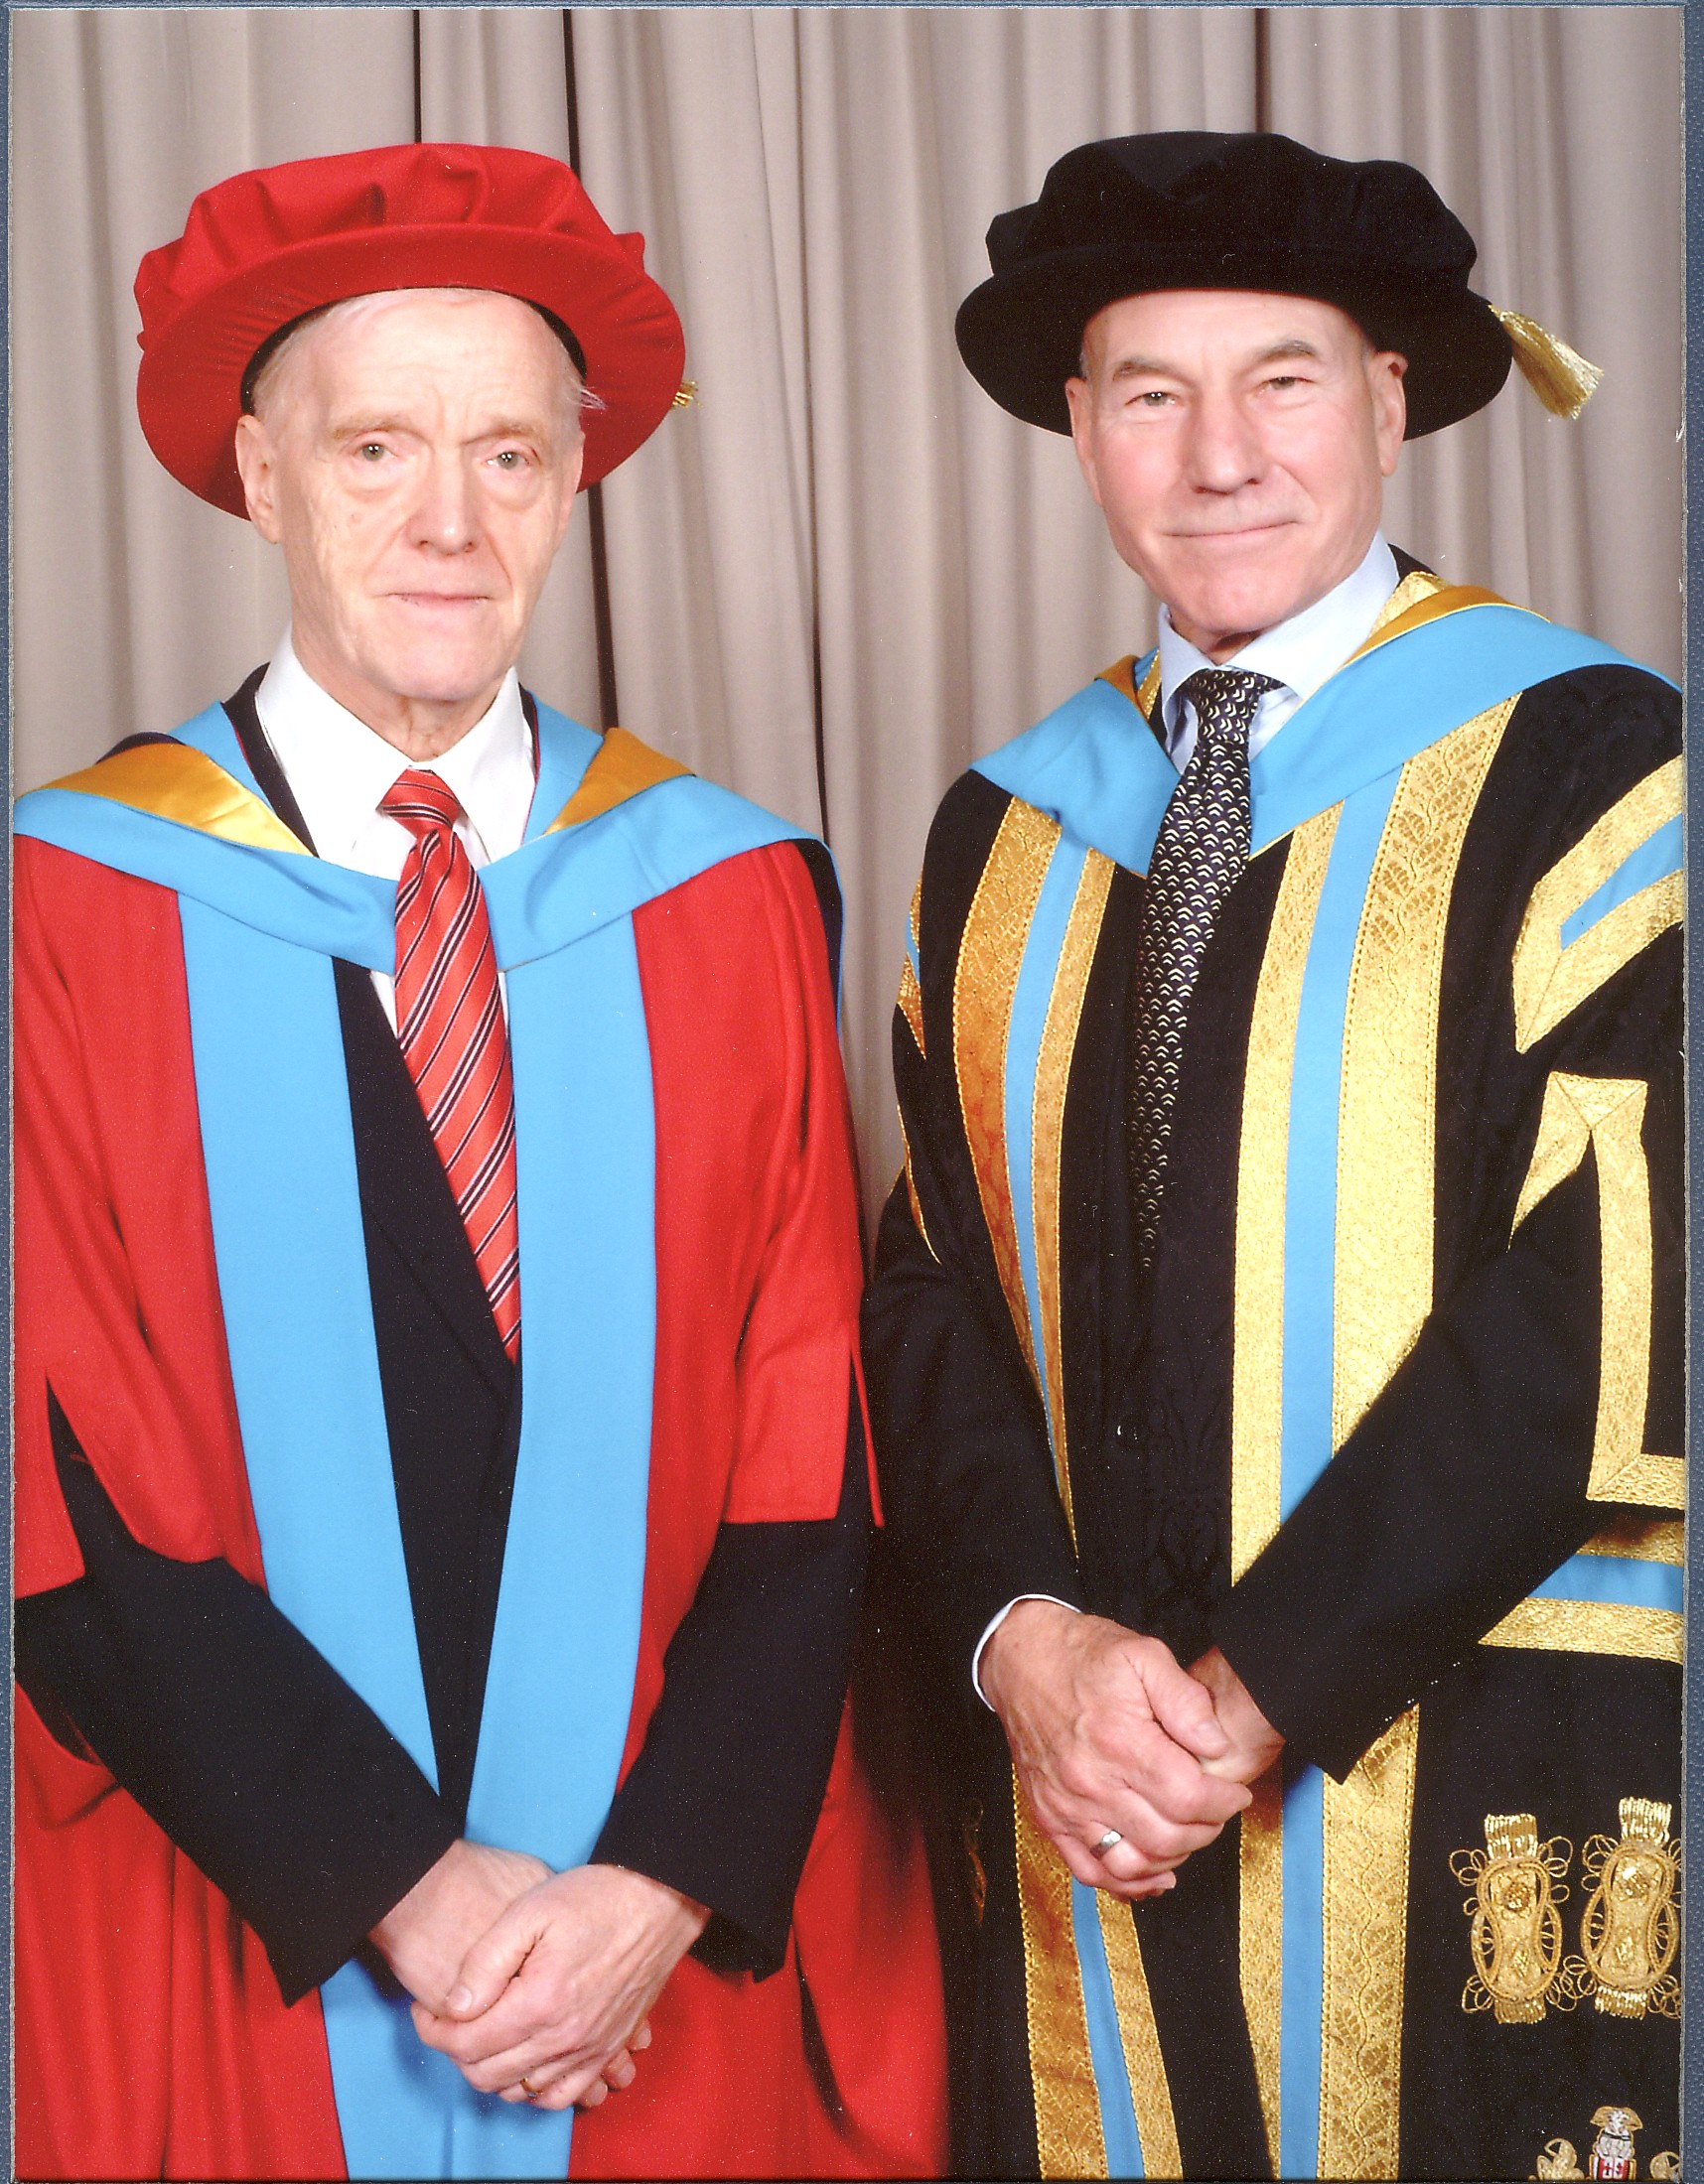 Accepting award of an honorary D Sc. from the University of Huddersfield when Patrick Stewart was Chancellor